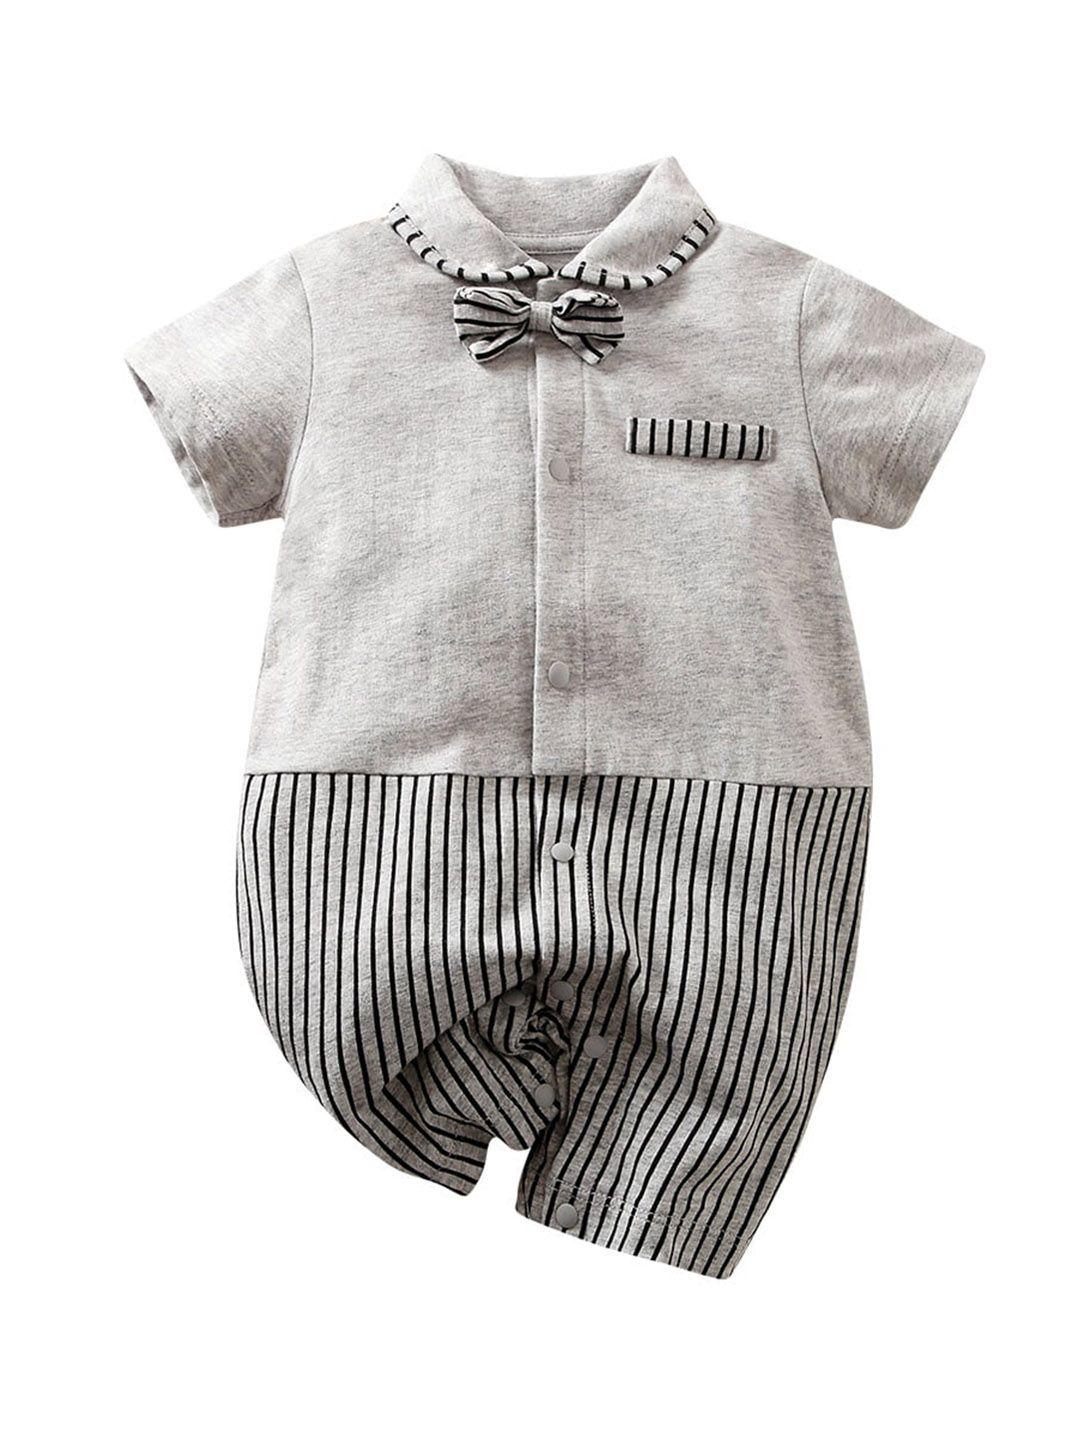 stylecast grey infant boys striped short sleeves shirt collar cotton rompers